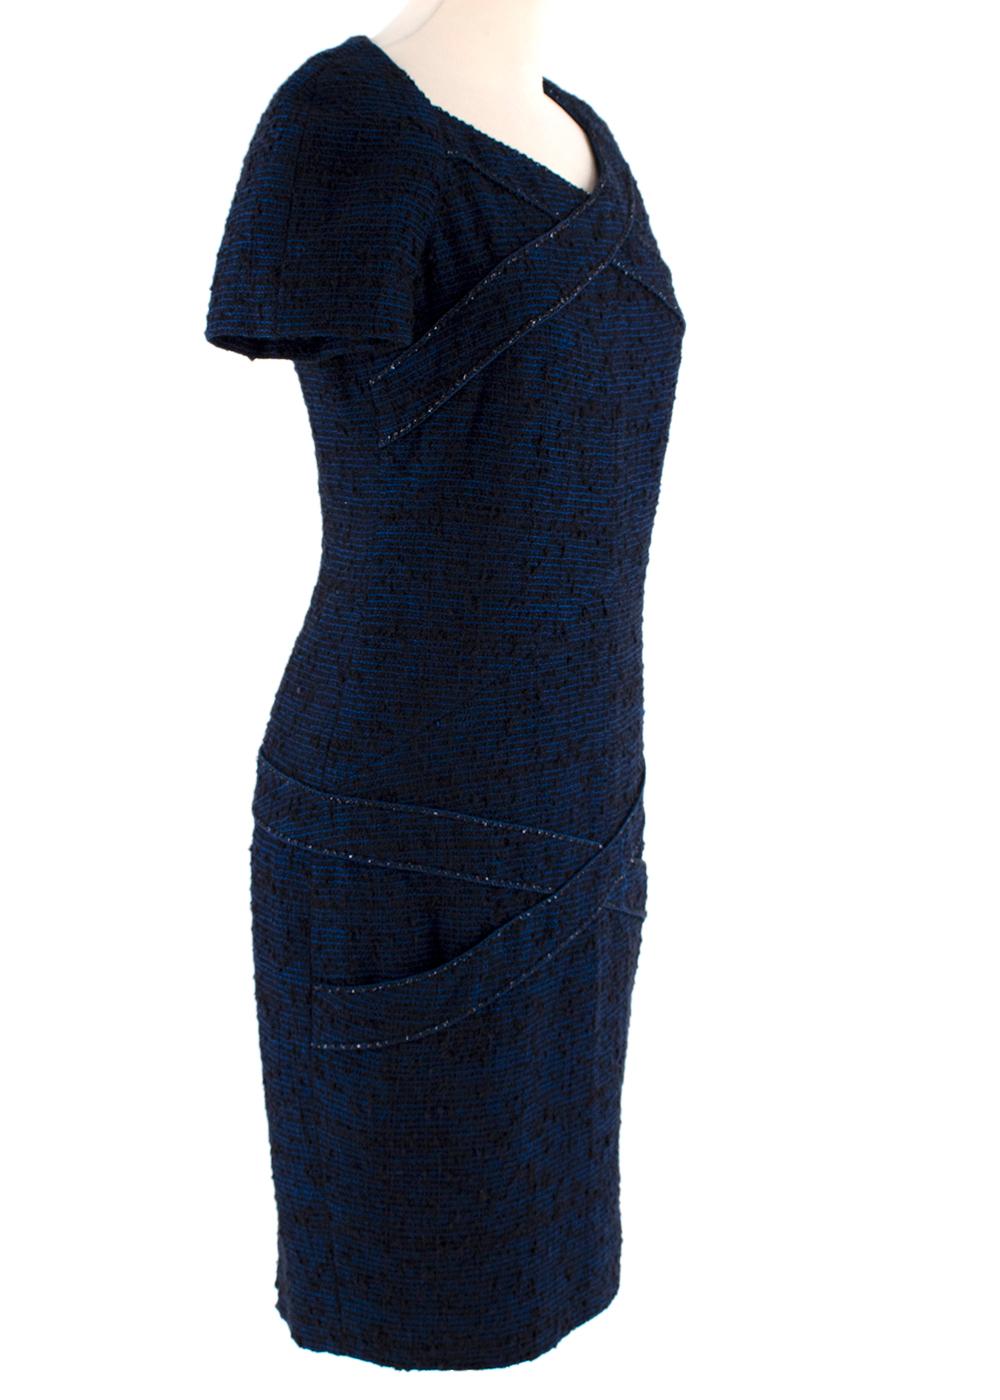 Chanel Navy Boucle Woven Alpaca Blend Pencil Dress

 Iconic Chanel design rendered in soft, feminine soft pink tones

-Short sleeve navy blue fitted dress with a stitch cross over detail and a subtle metallic thread running along the seam line